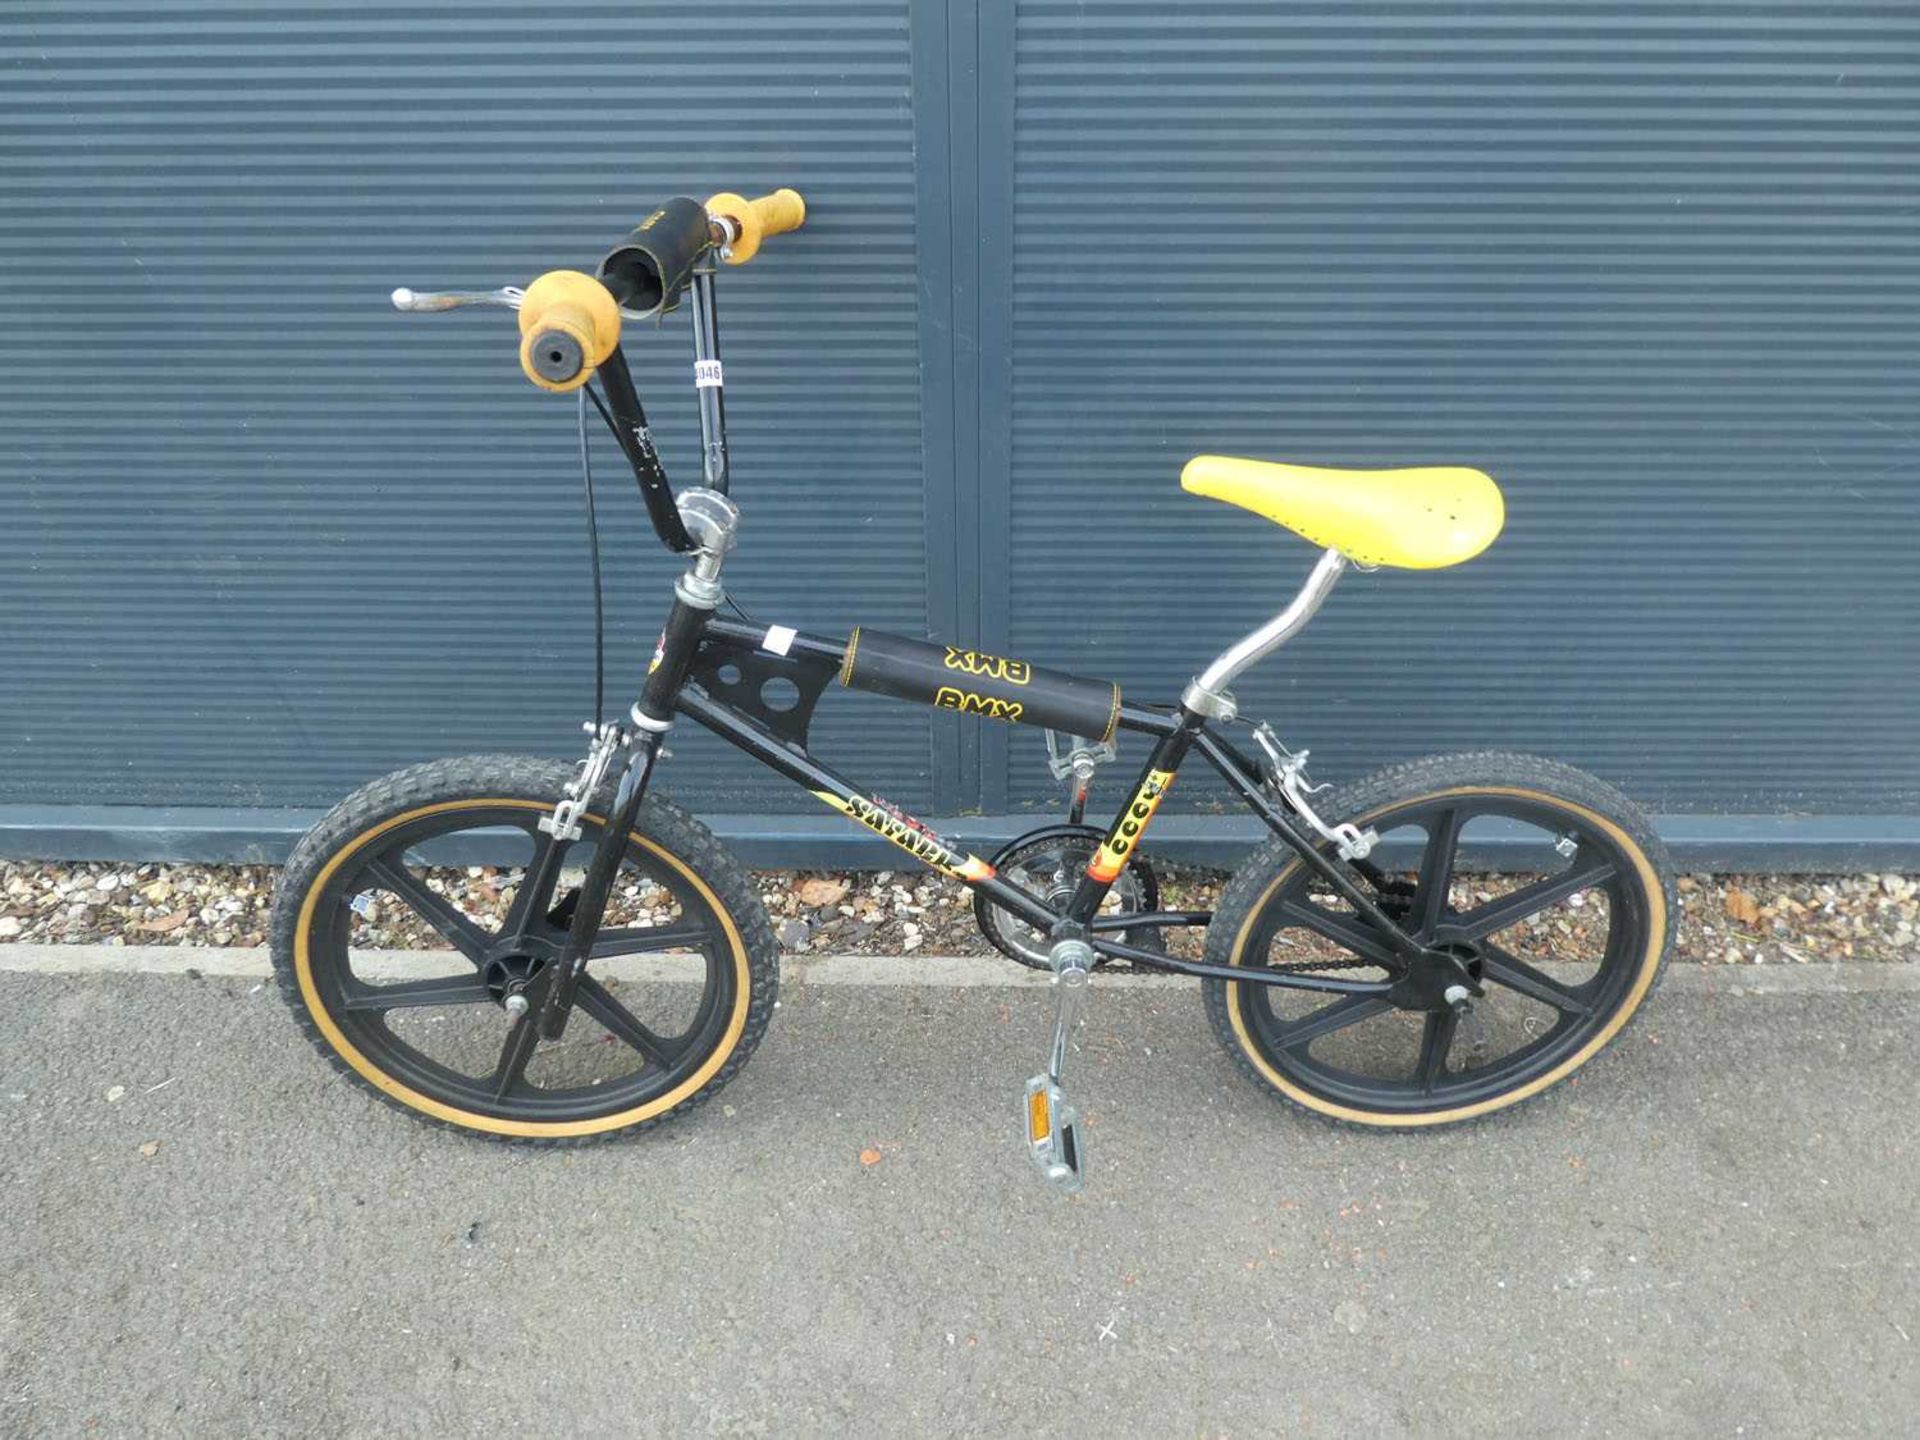 Black and yellow BMX style cycle